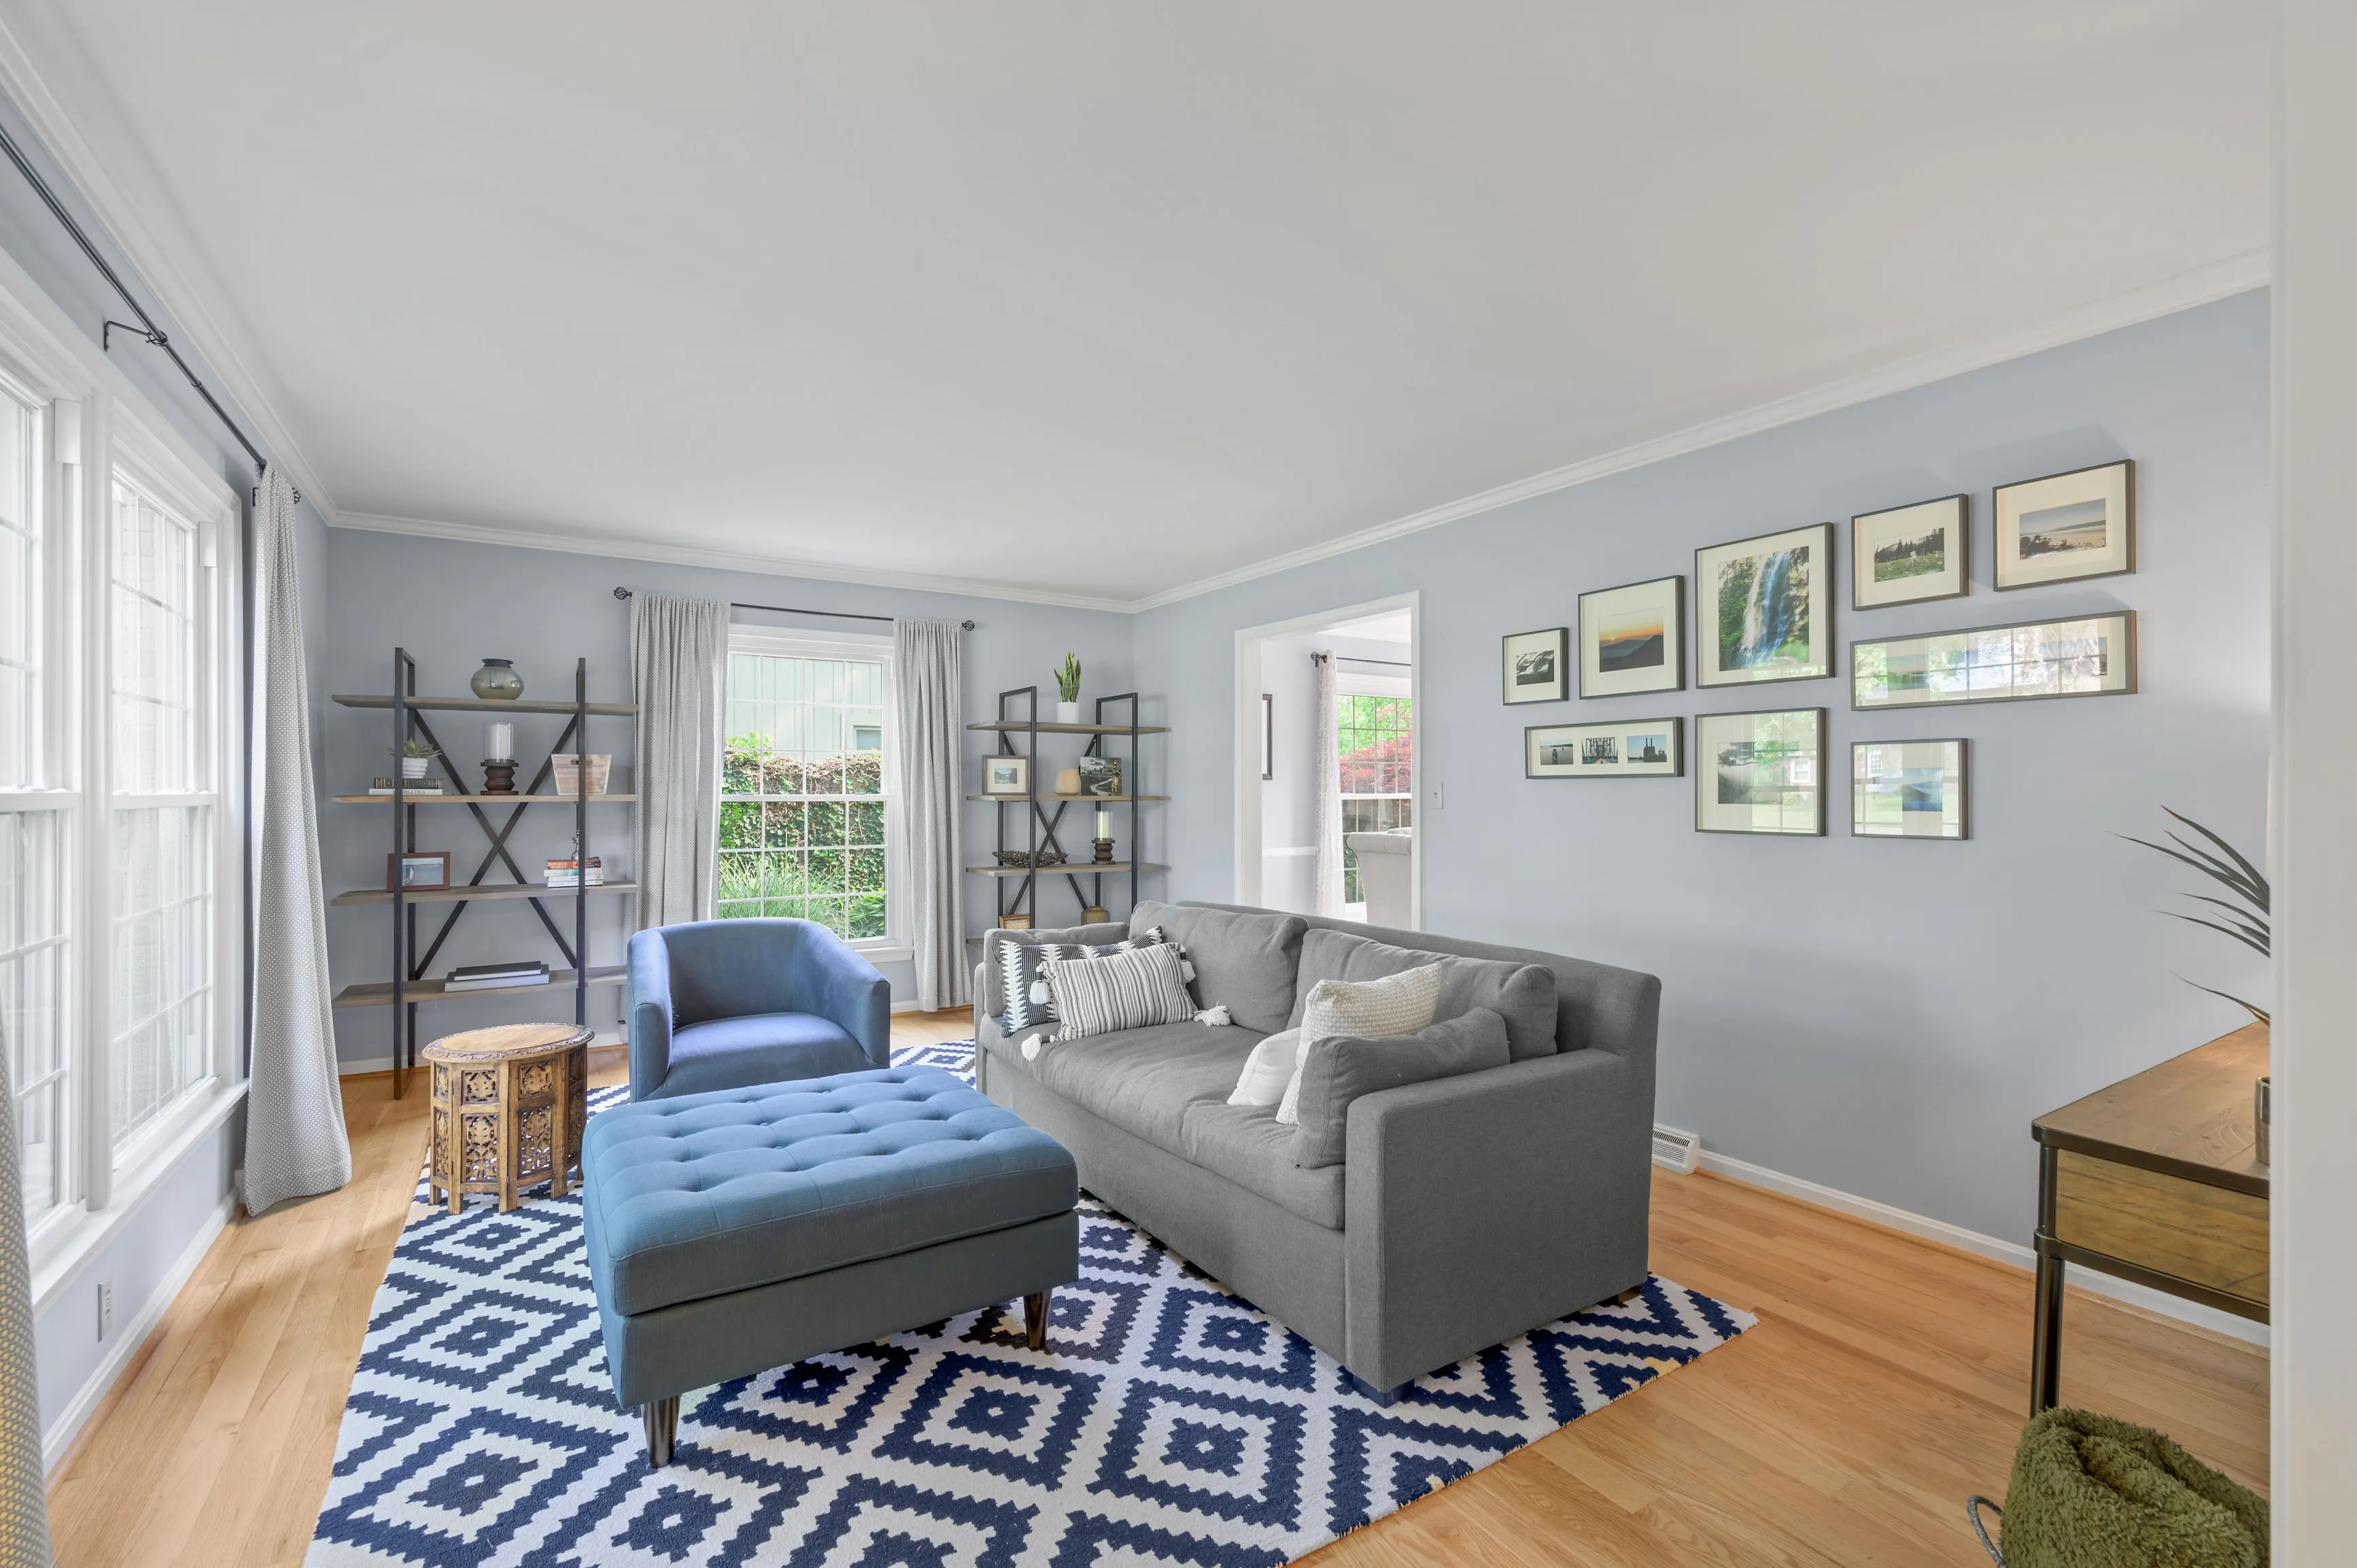 Bright and spacious living room with hardwood floors, a blue patterned area rug, grey sofa, blue armchair, and a wall decorated with framed pictures.